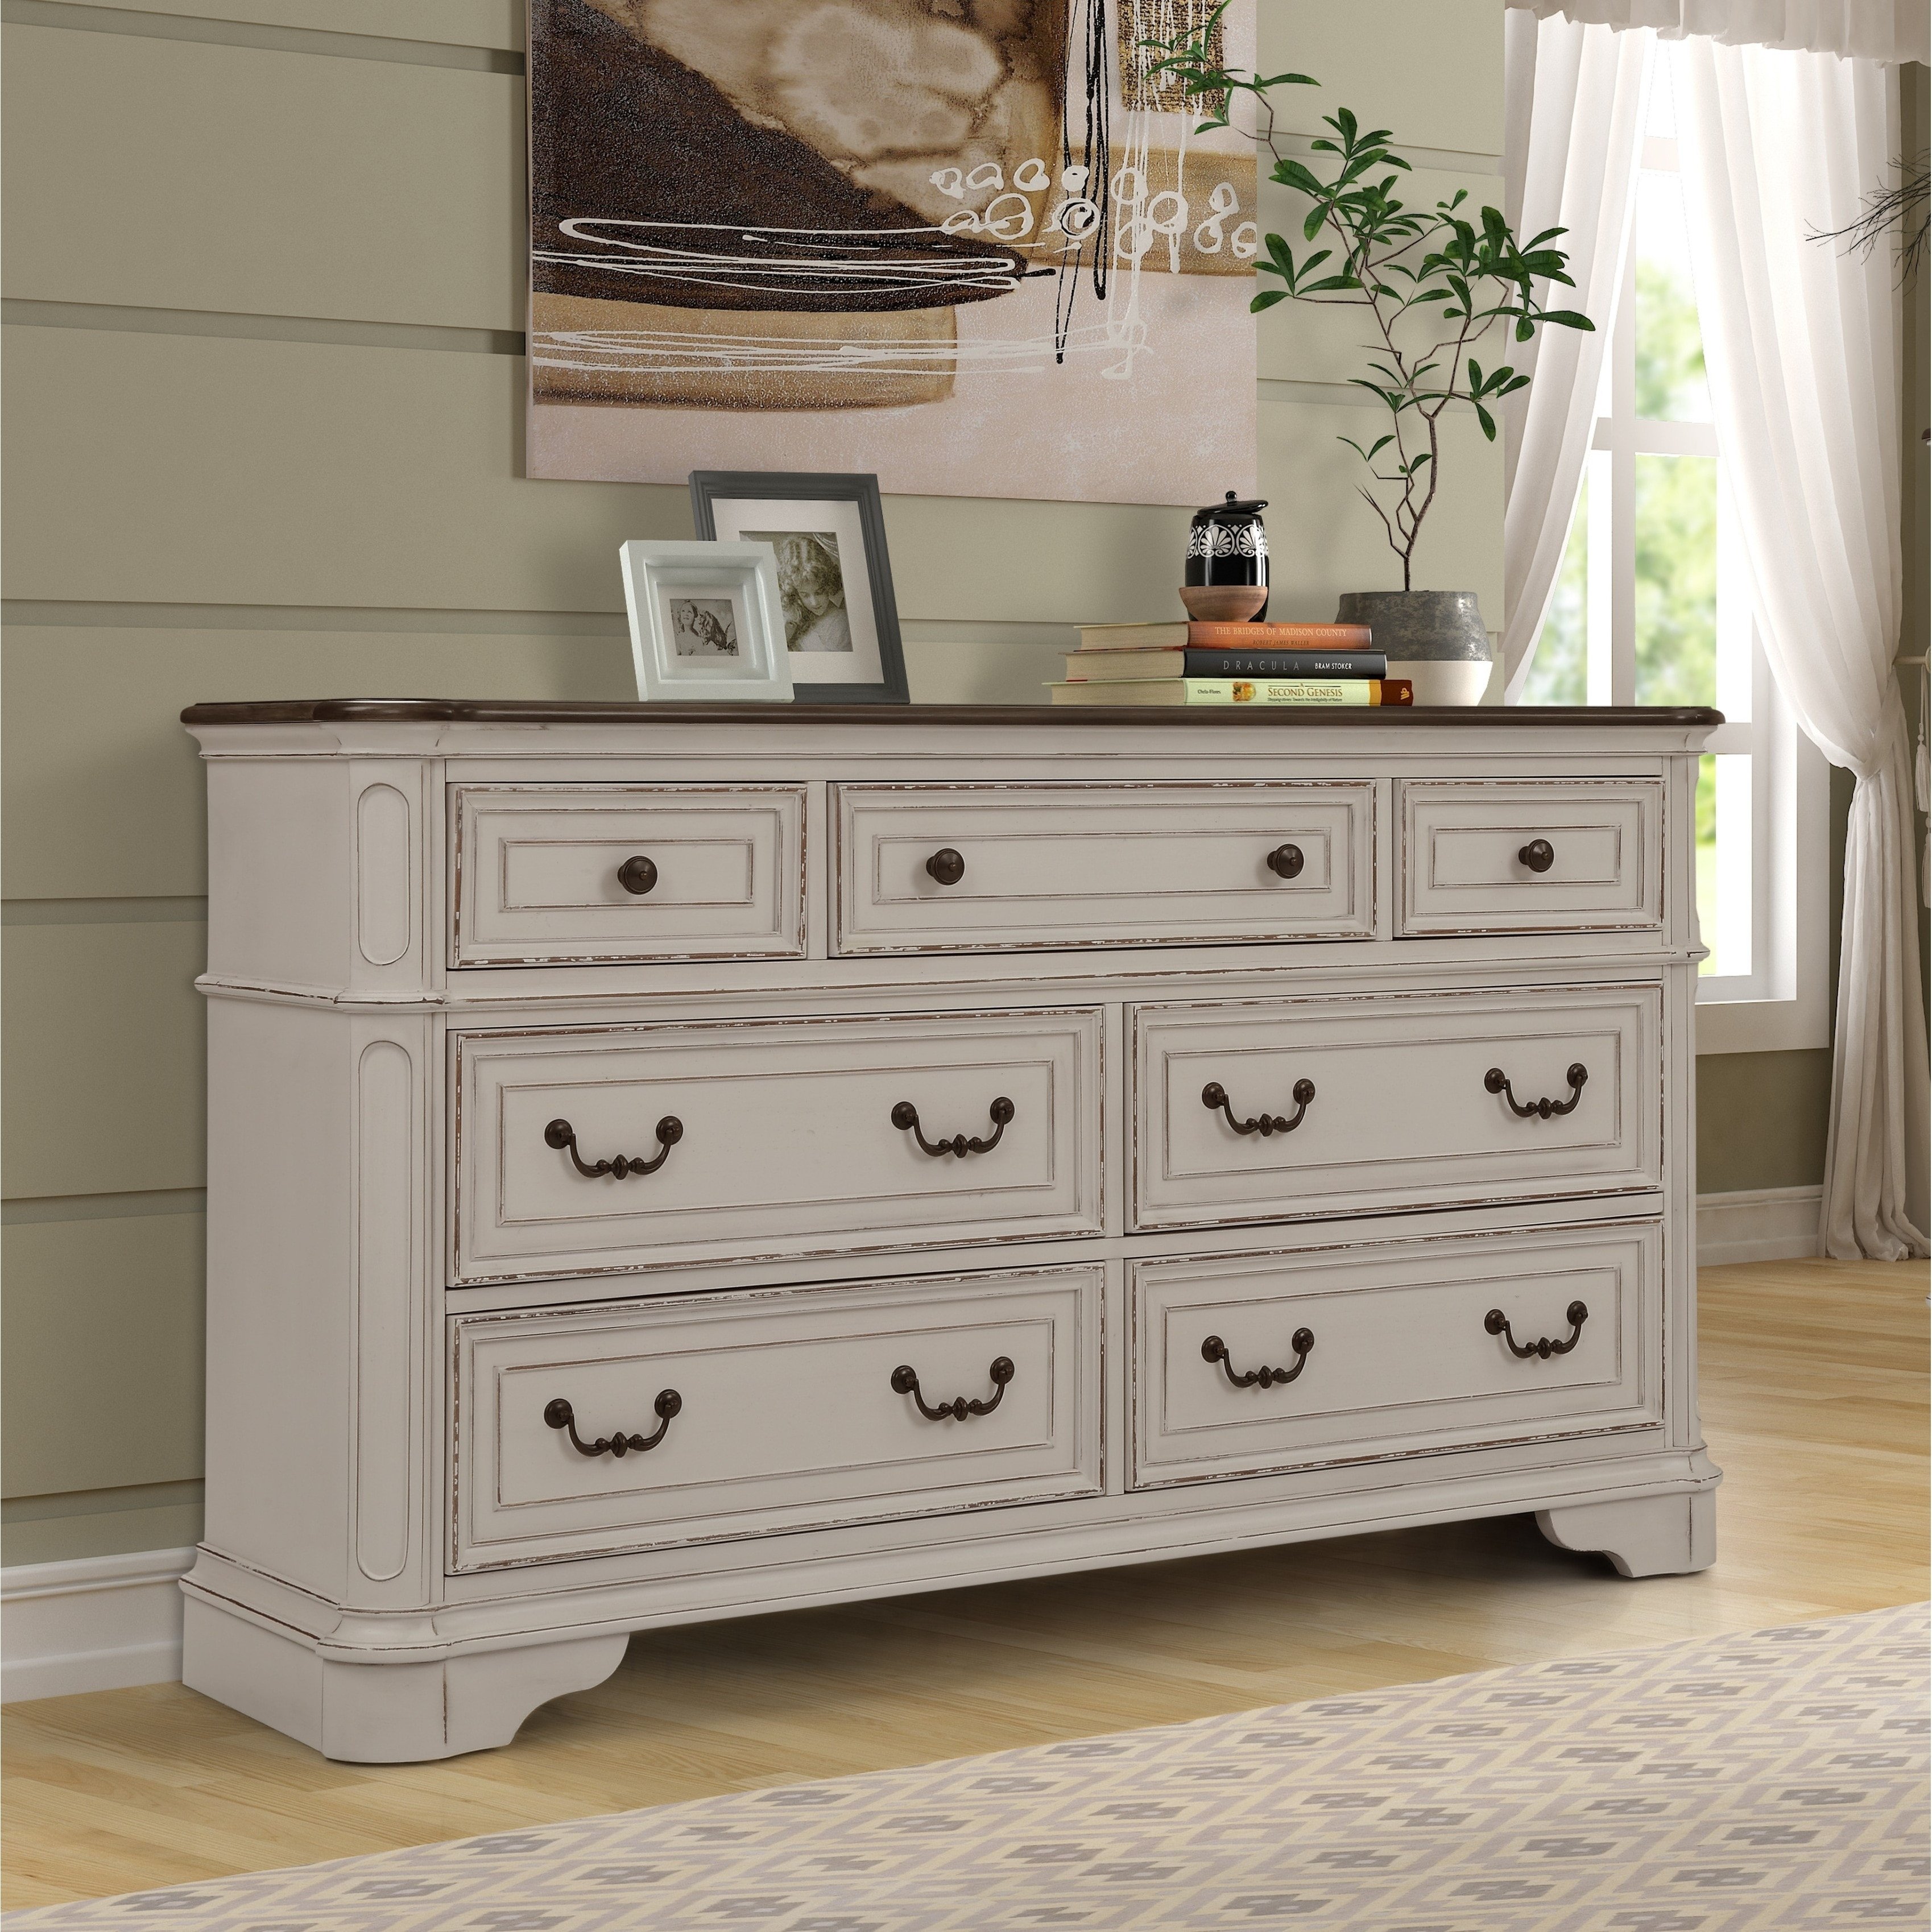 Distressed Wood Bedroom Furniture Luxury the Gray Barn Ariana Hills Antique White and Oak Wood Dresser